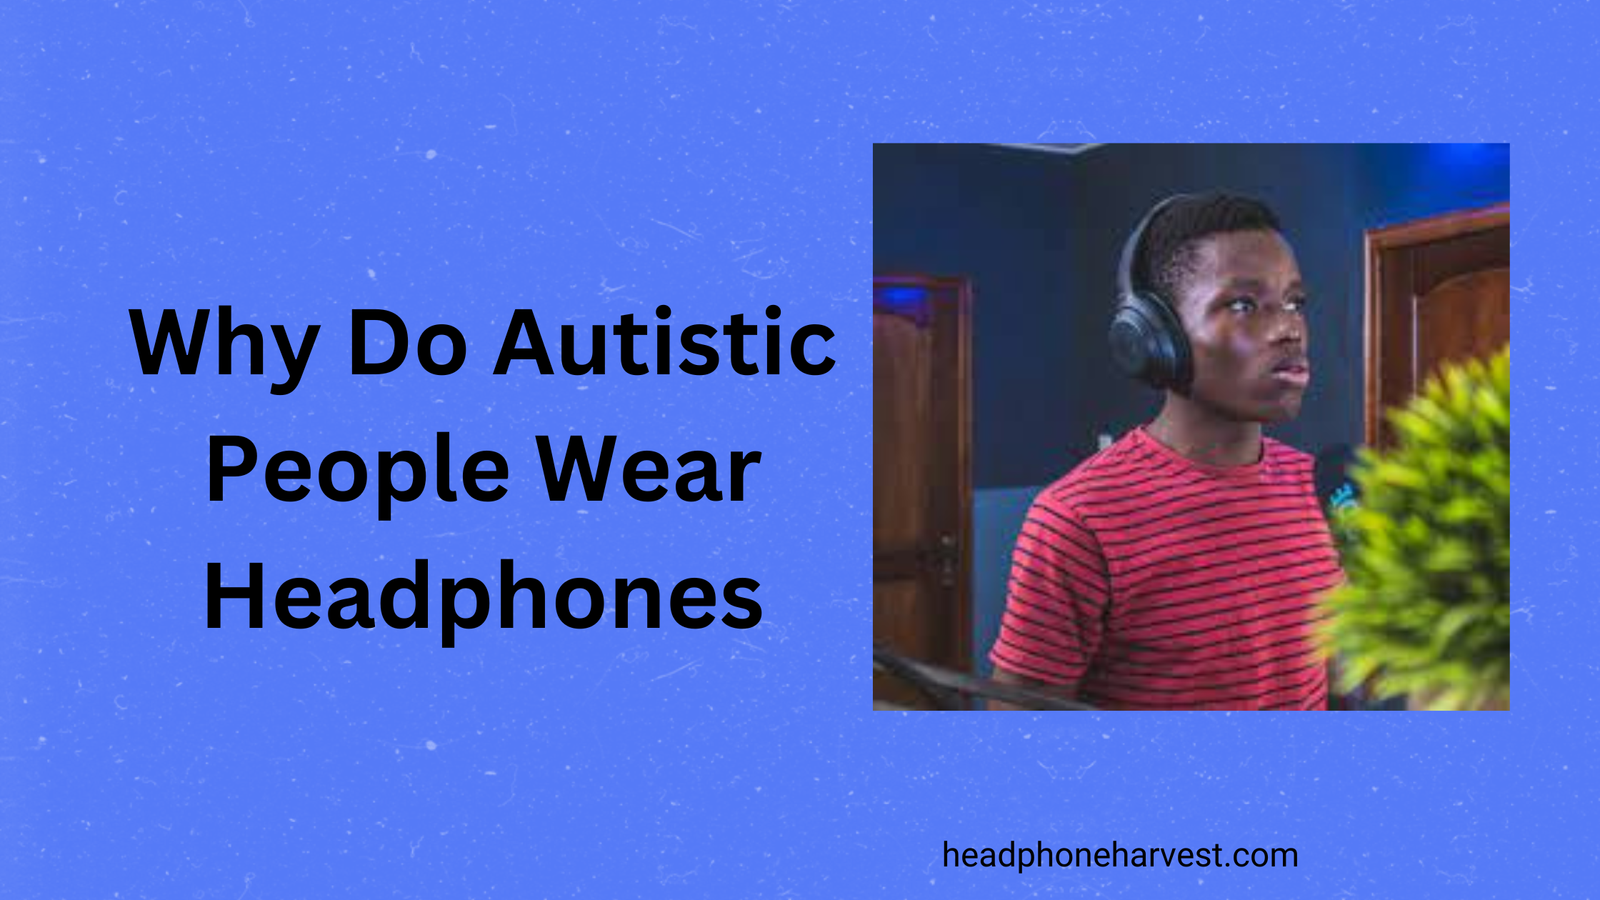 Why Do Autistic People Wear Headphones